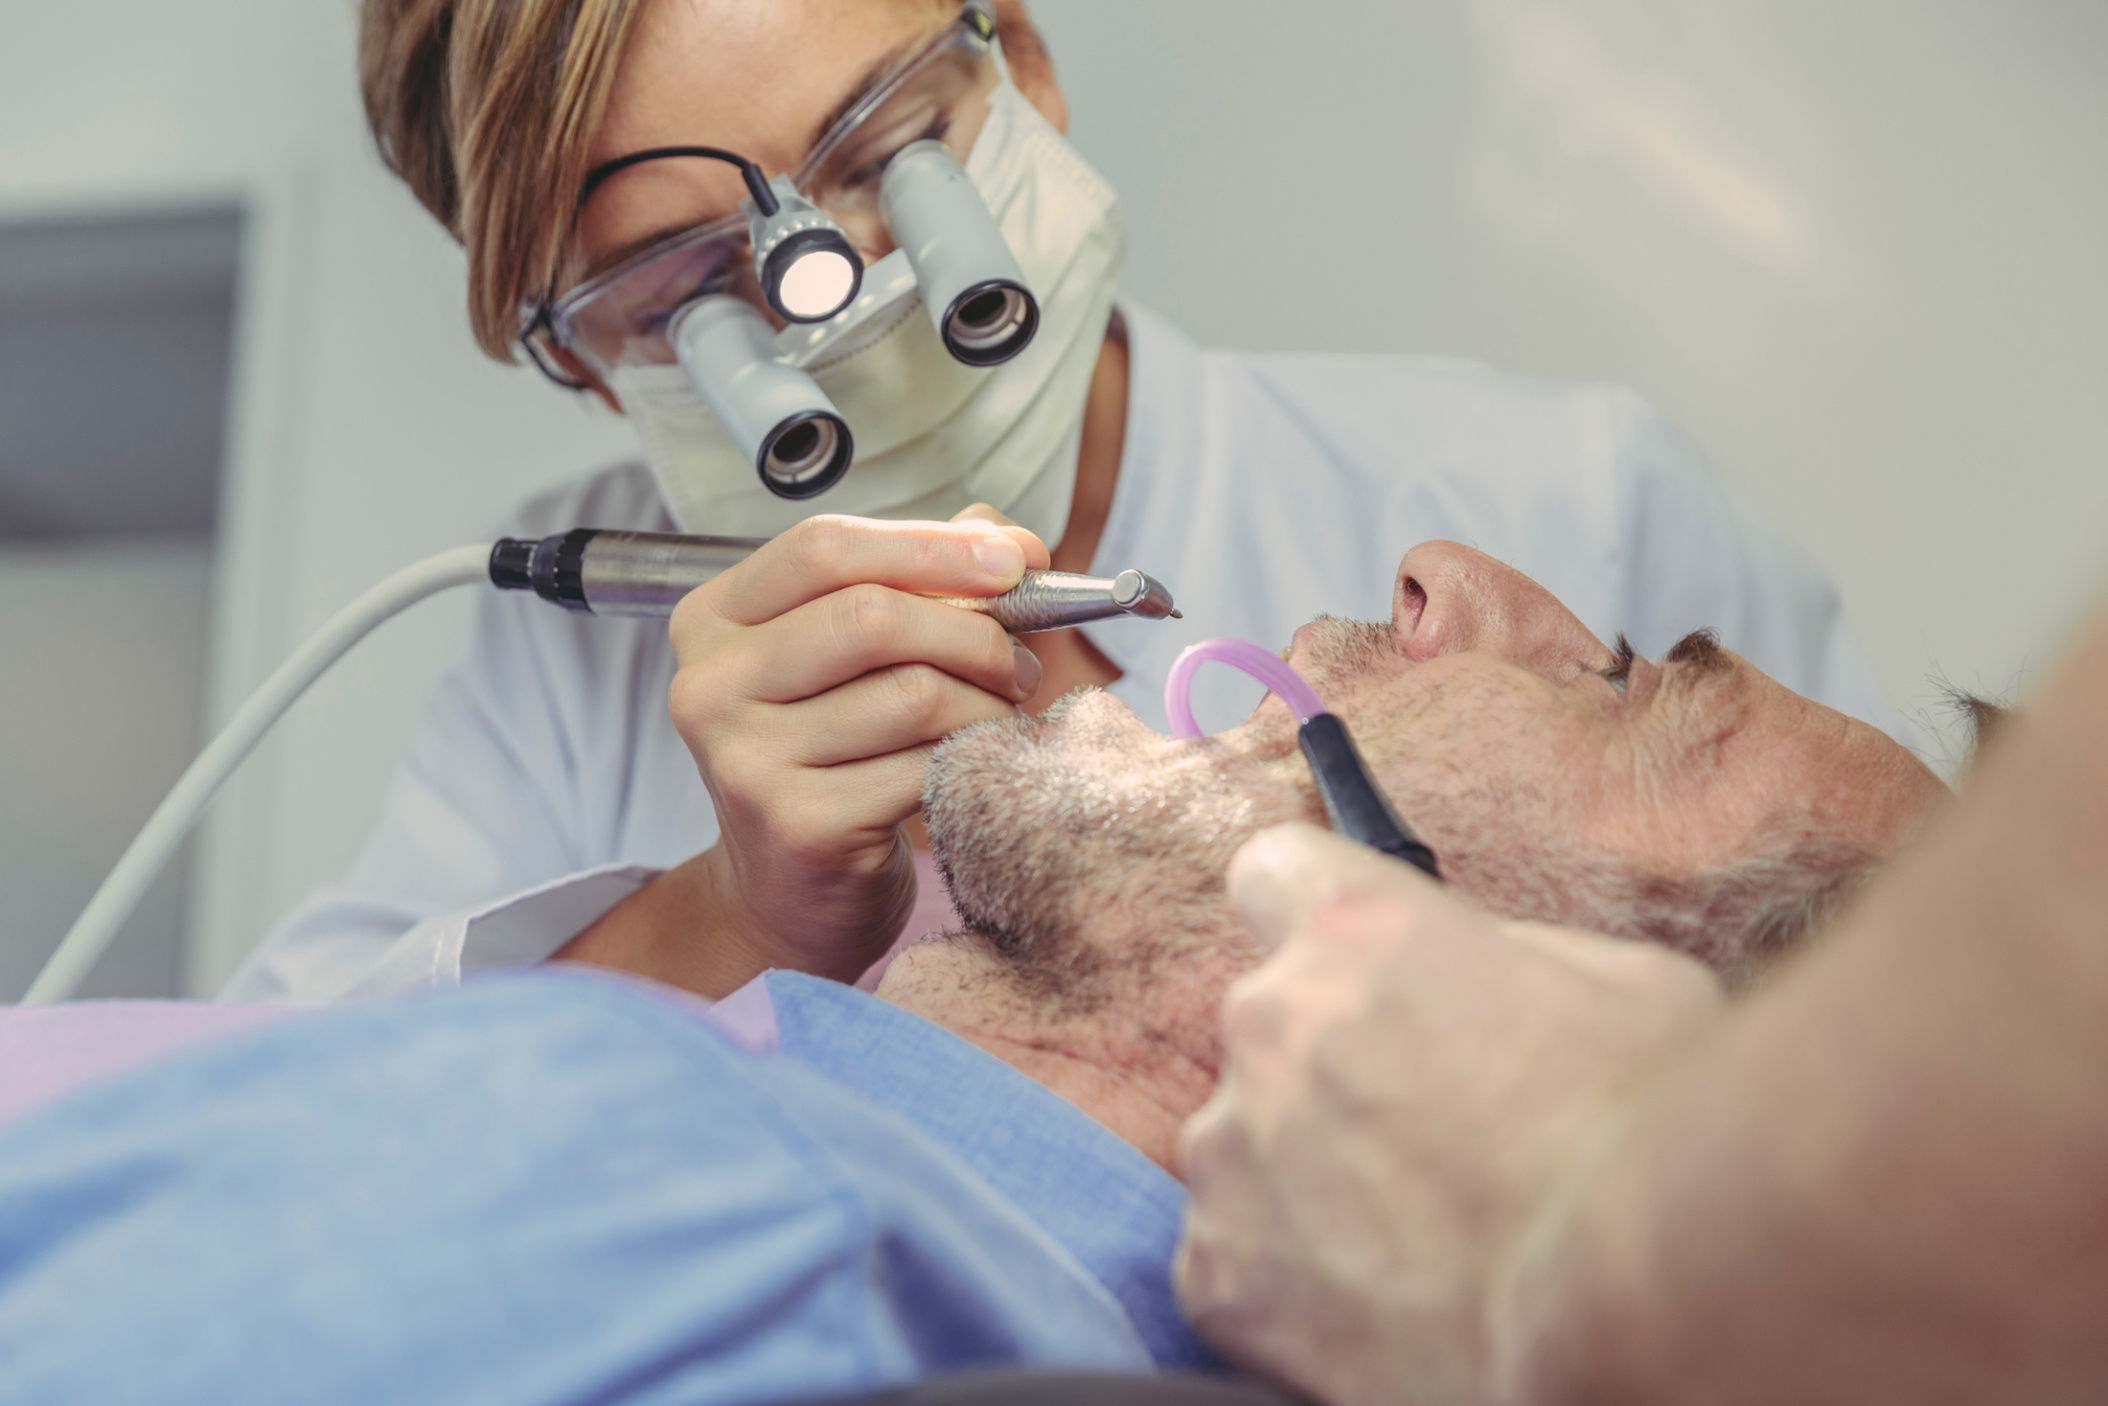 Dentist and using magnifying glasses while working on patient’s teeth, Germany